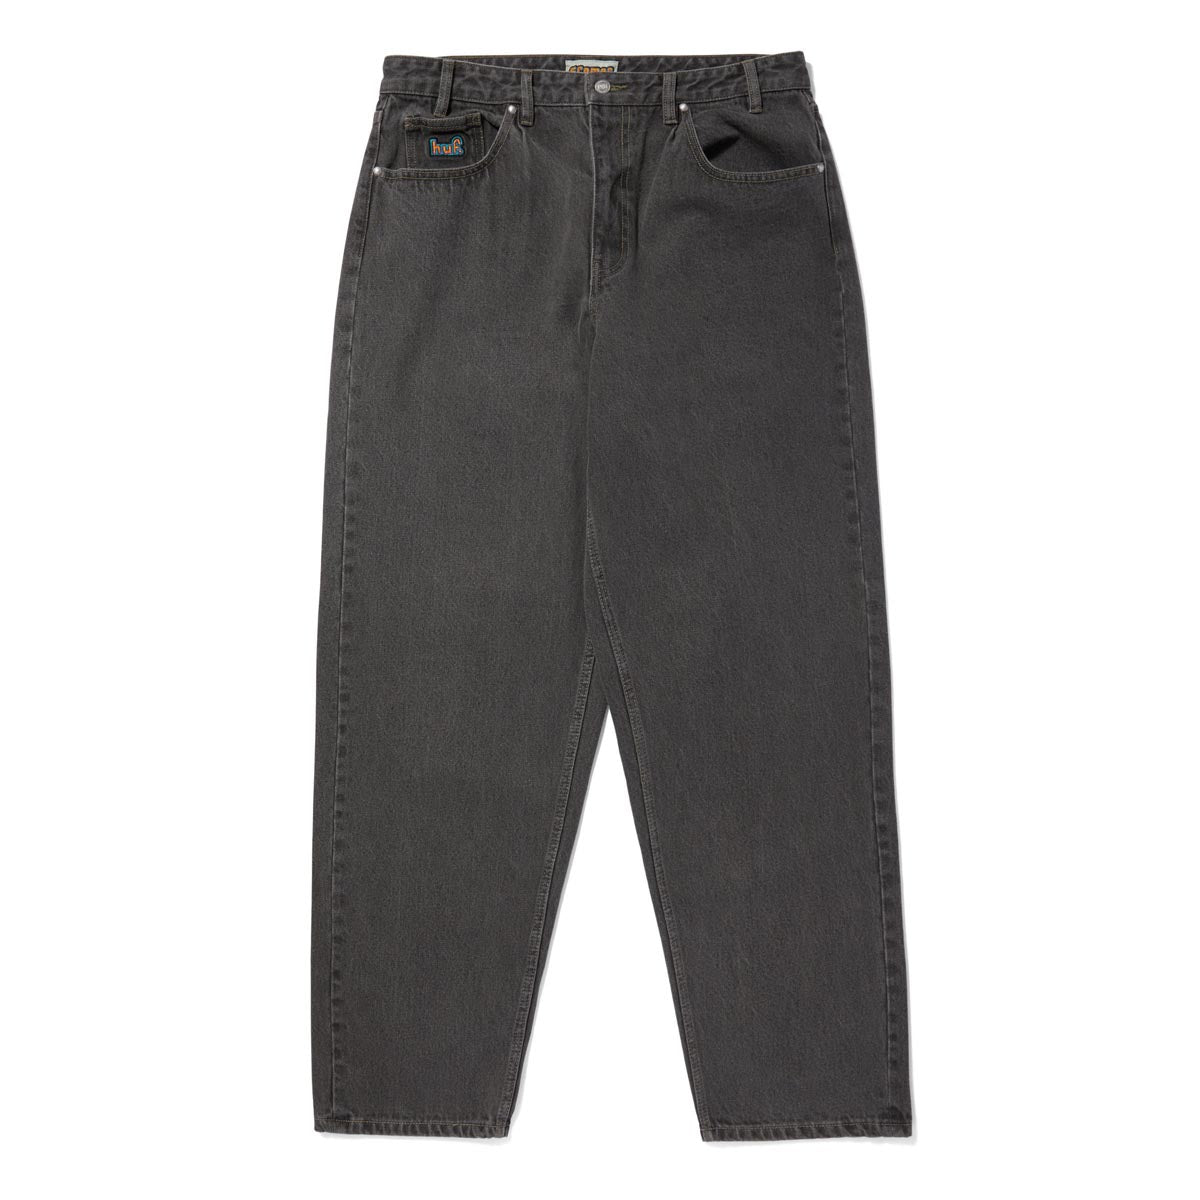 HUF Cromer Washed Pants - Frost Gray image 1